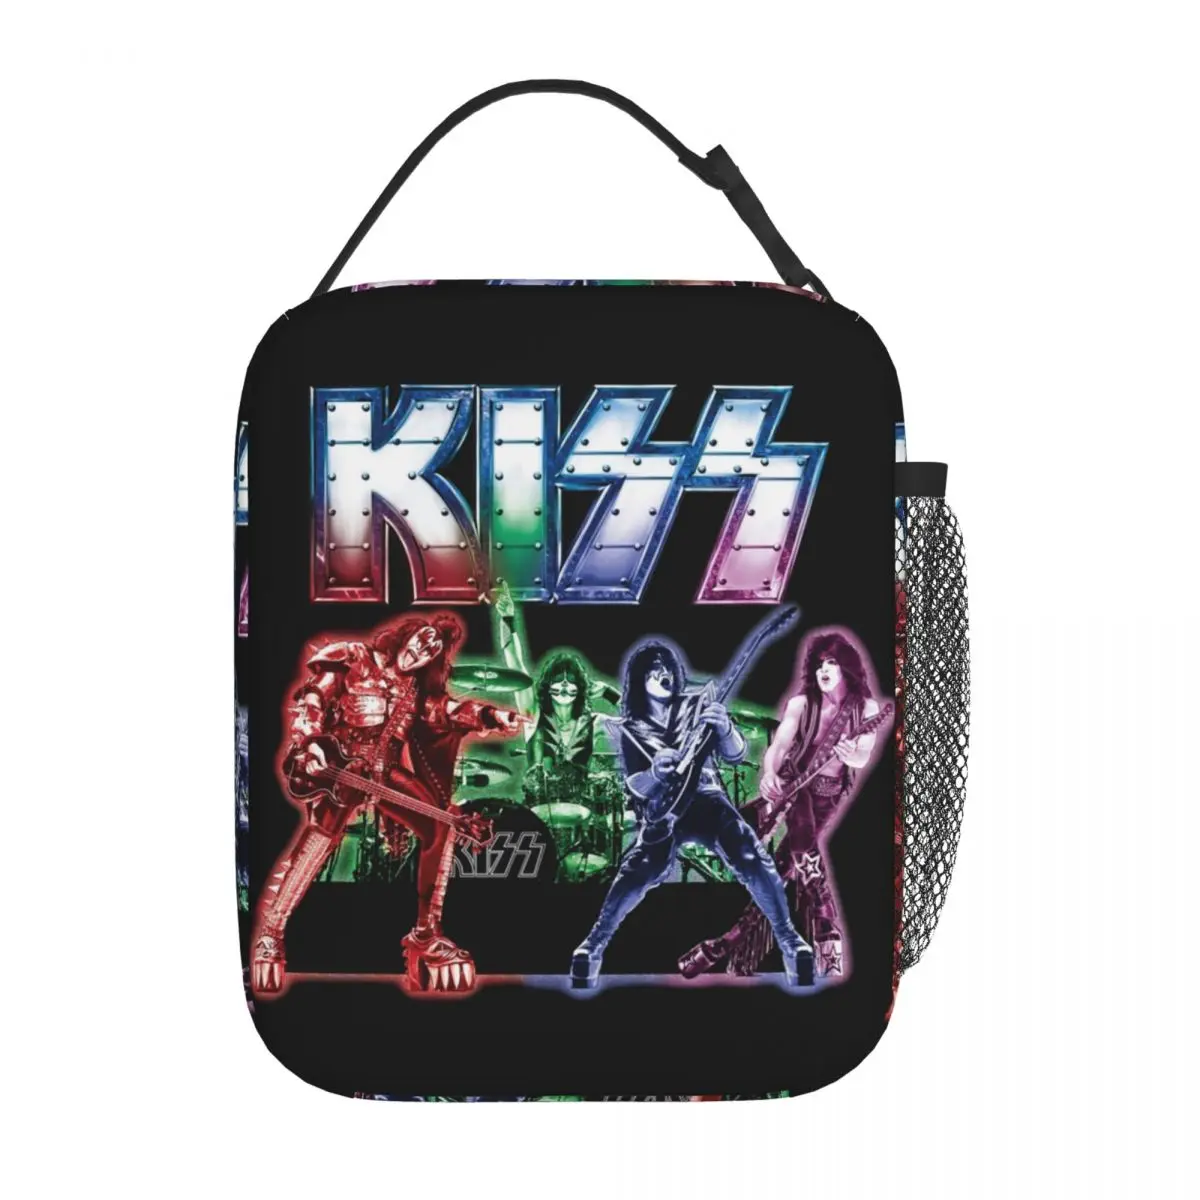 

Kiss Band Crazy Demon Catman Ace Rock Insulated Lunch Bag Lunch Container Reusable Thermal Cooler Bento Box School